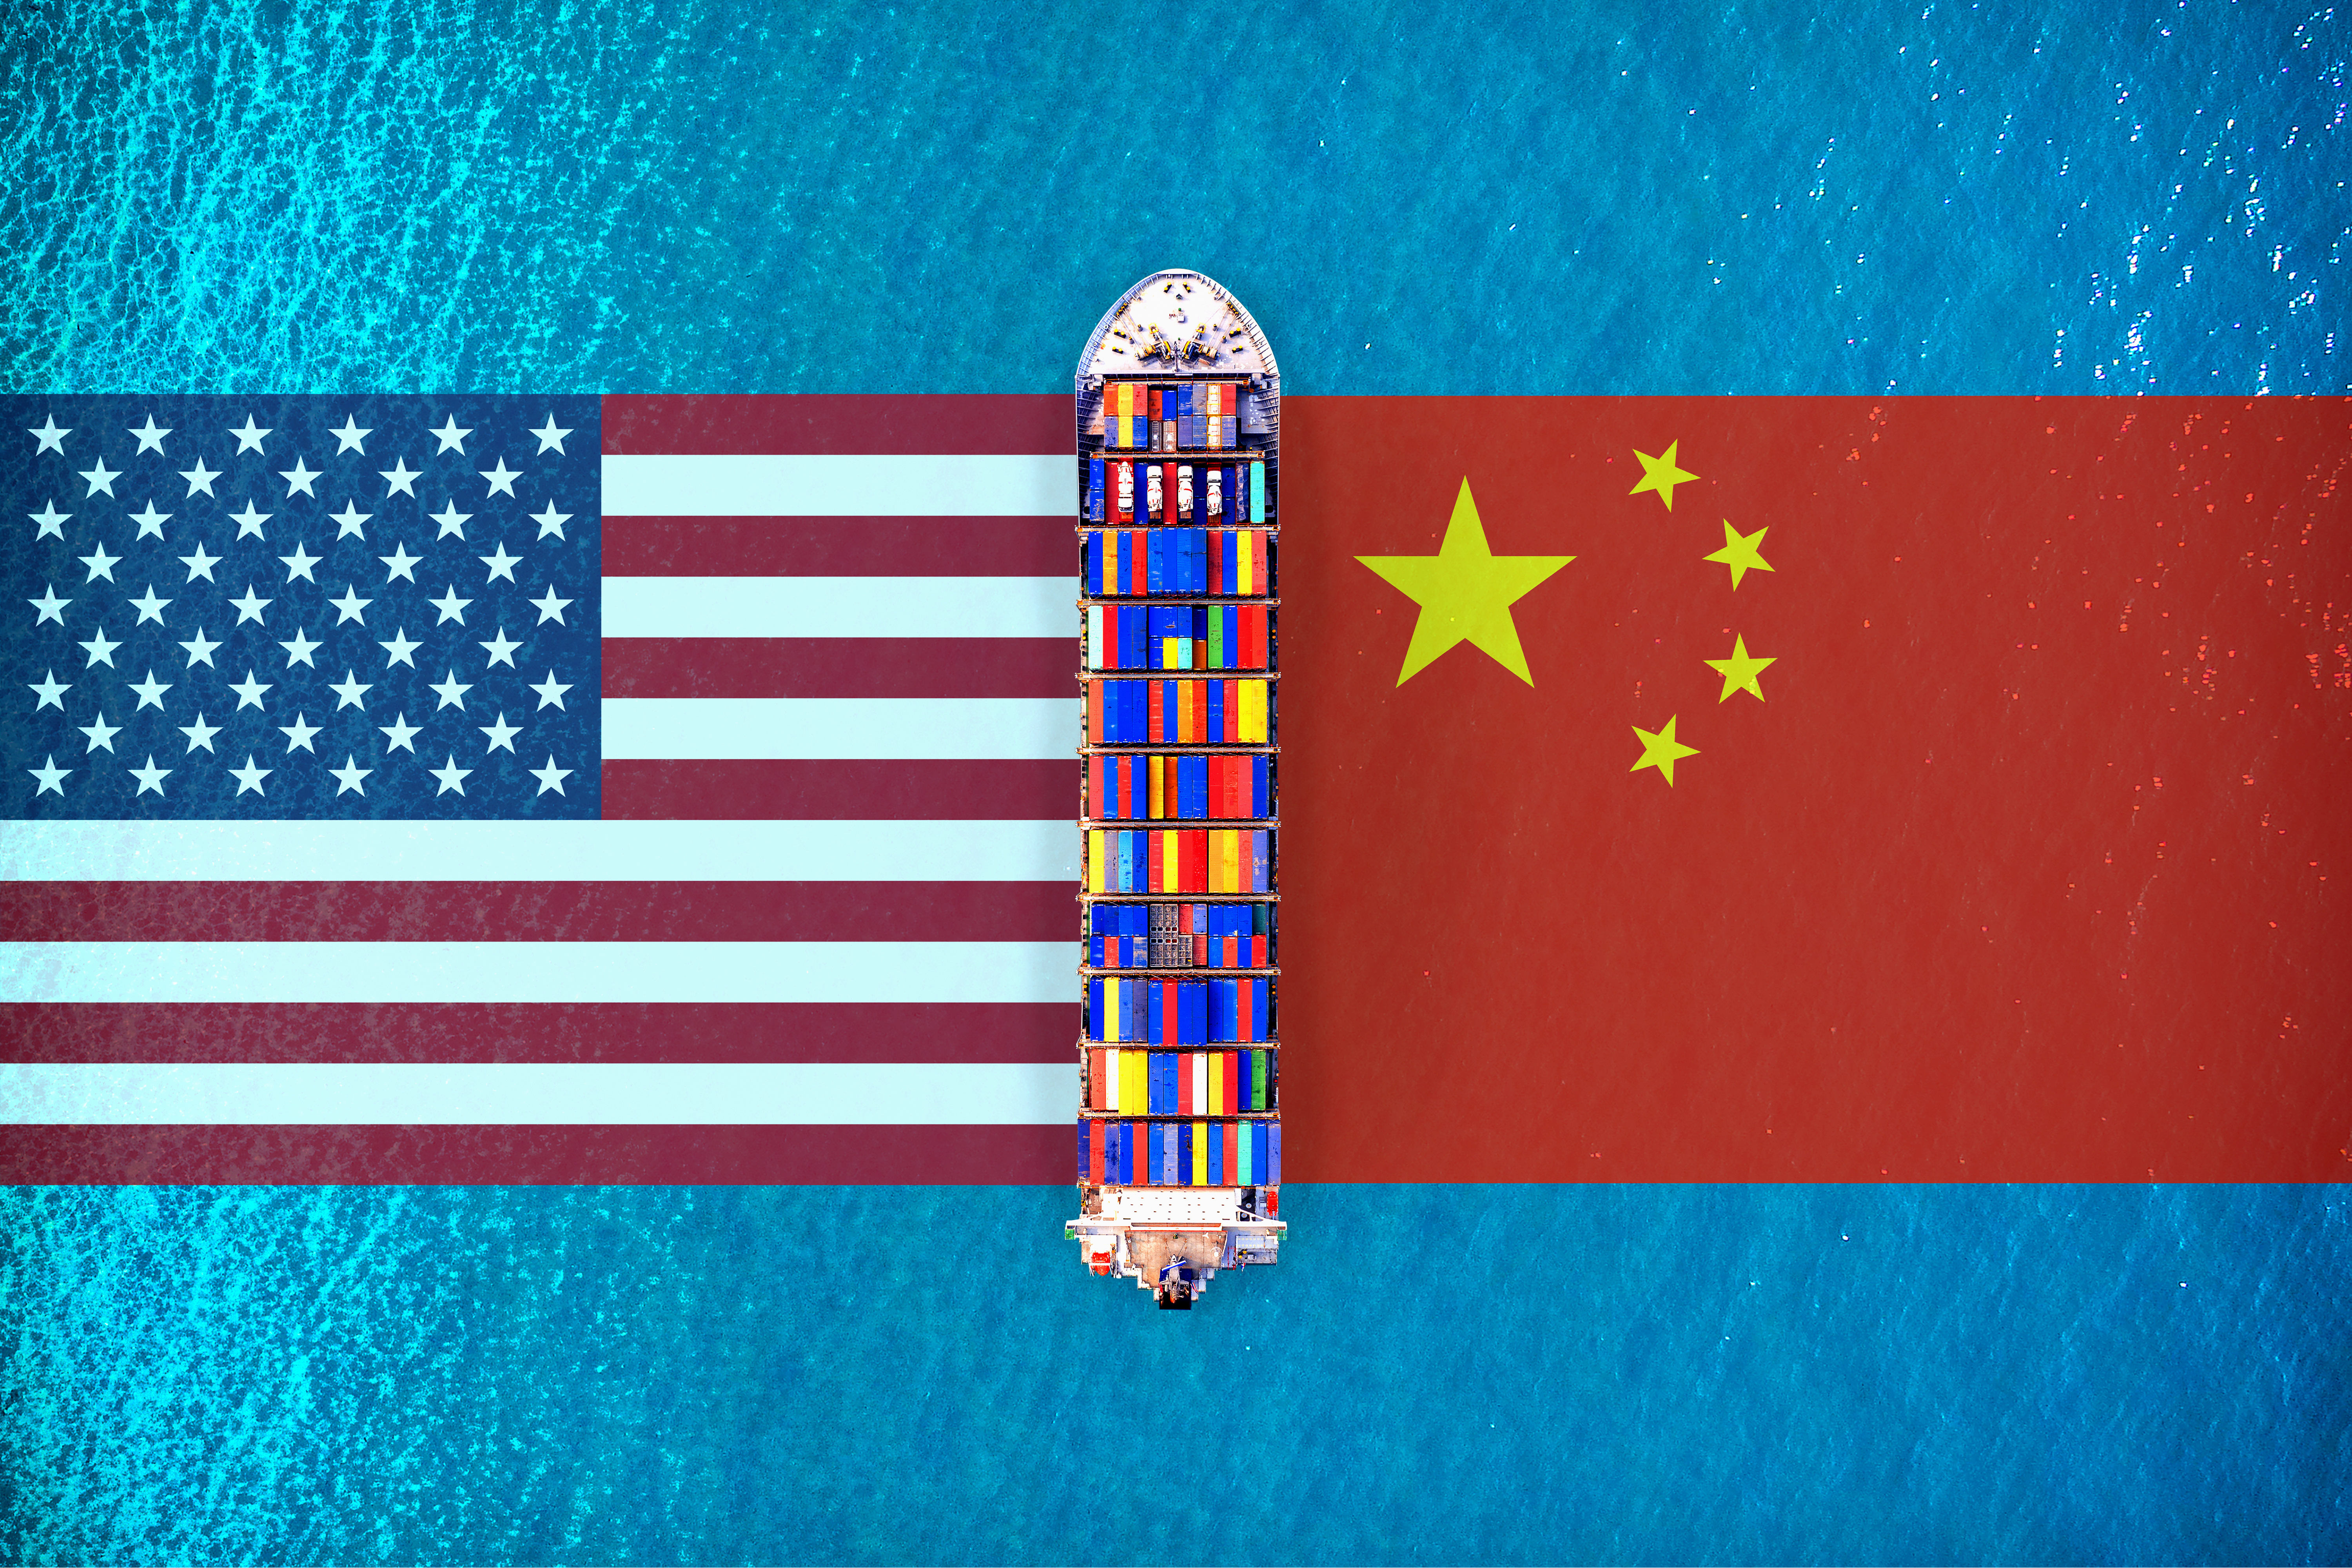 A container ship in between the US and Chinese flags